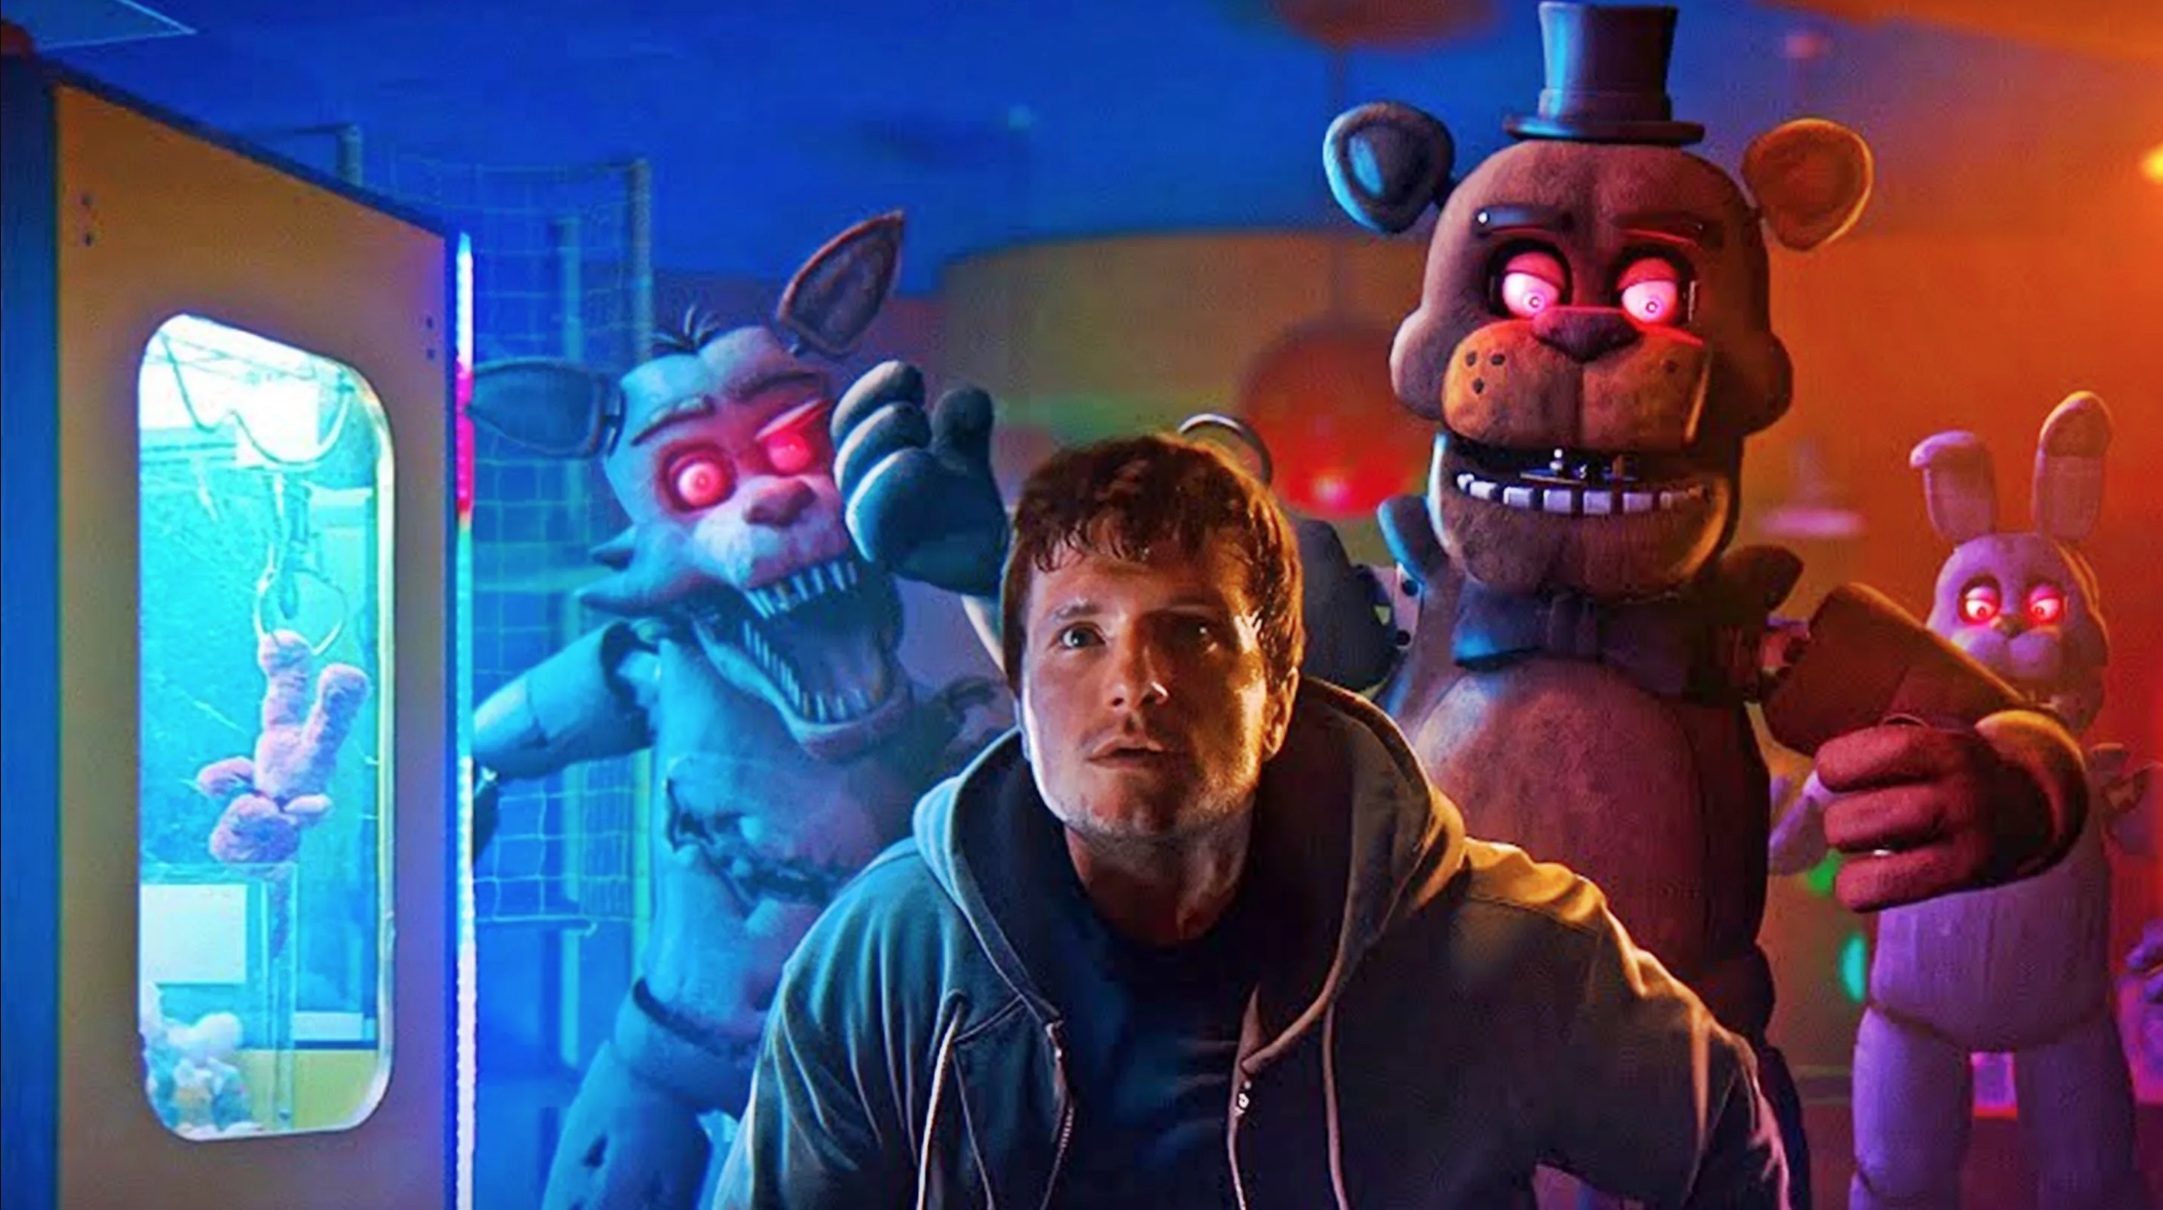  Josh Hutcherson ("Hunger Games") as Mike Schmidt in "Five Nights at Freddy's" courtesy Peacock